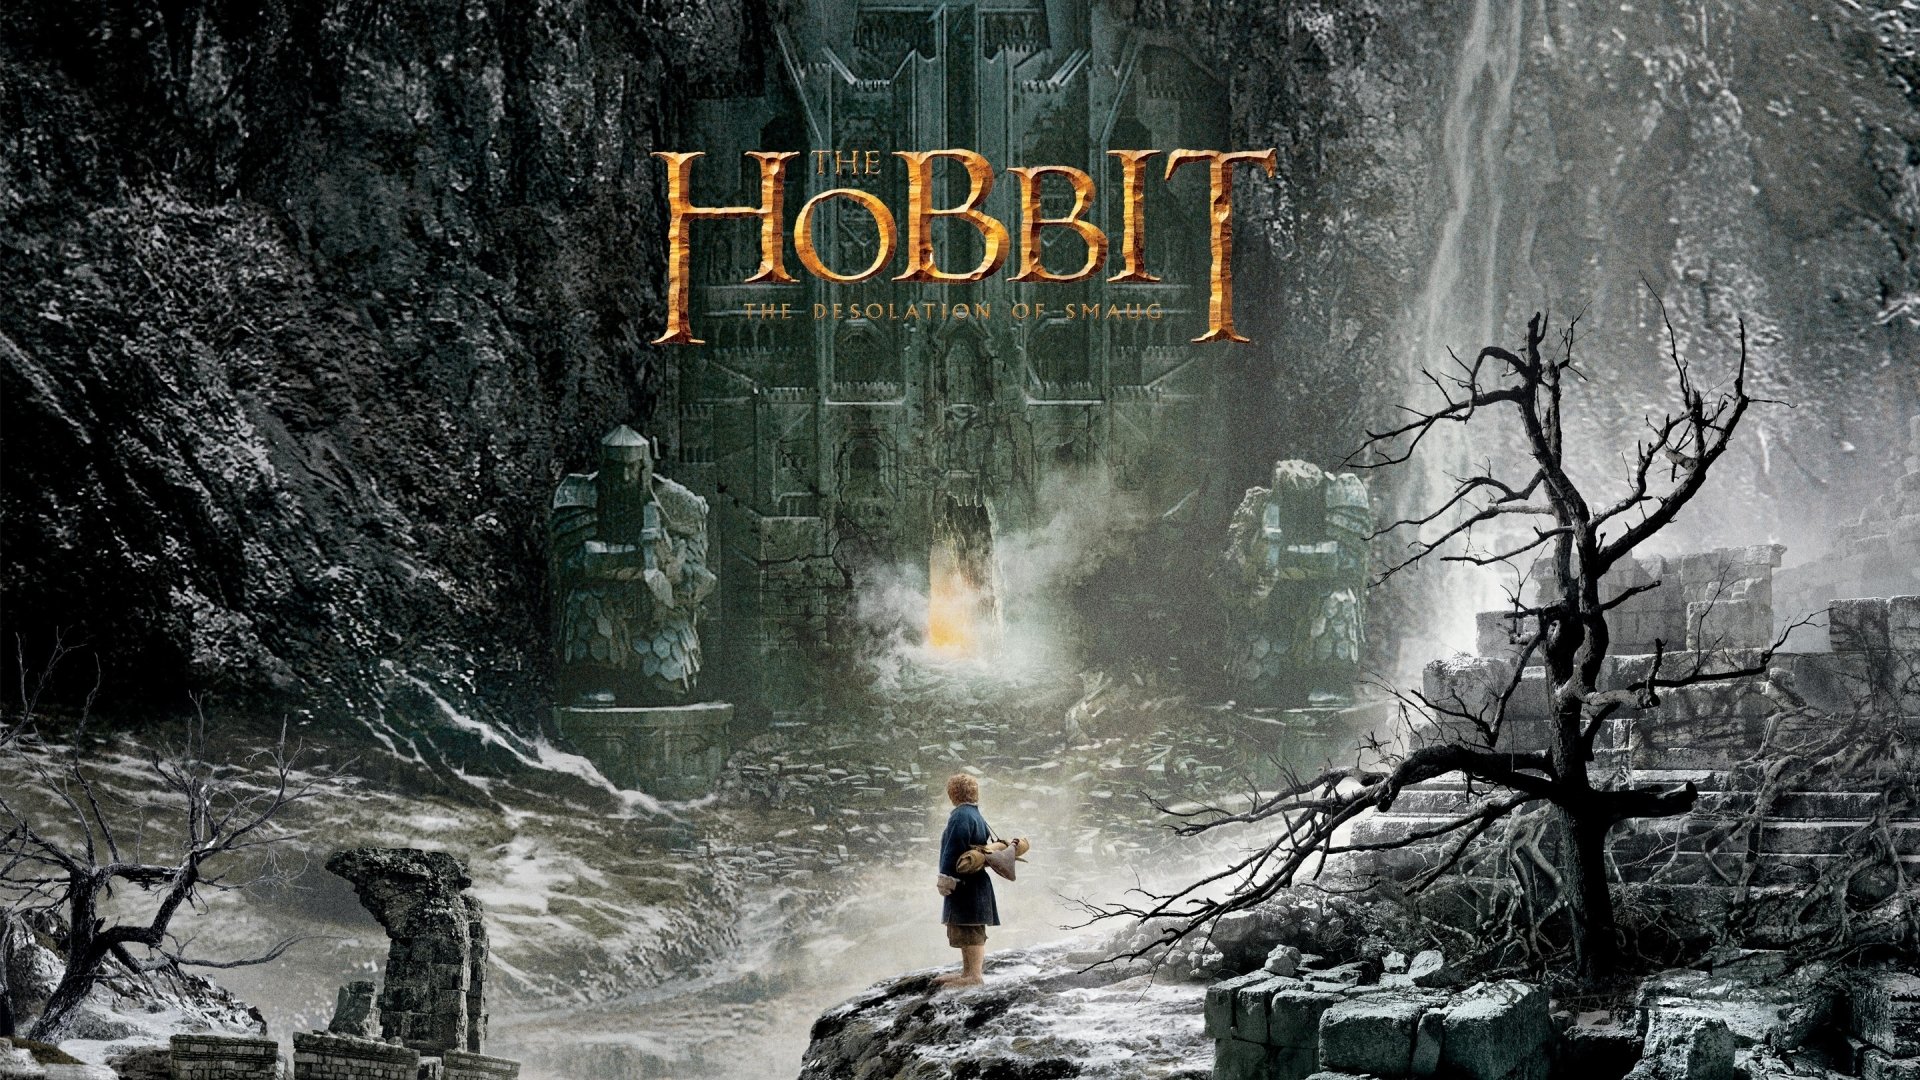 for iphone download The Hobbit: The Desolation of Smaug free